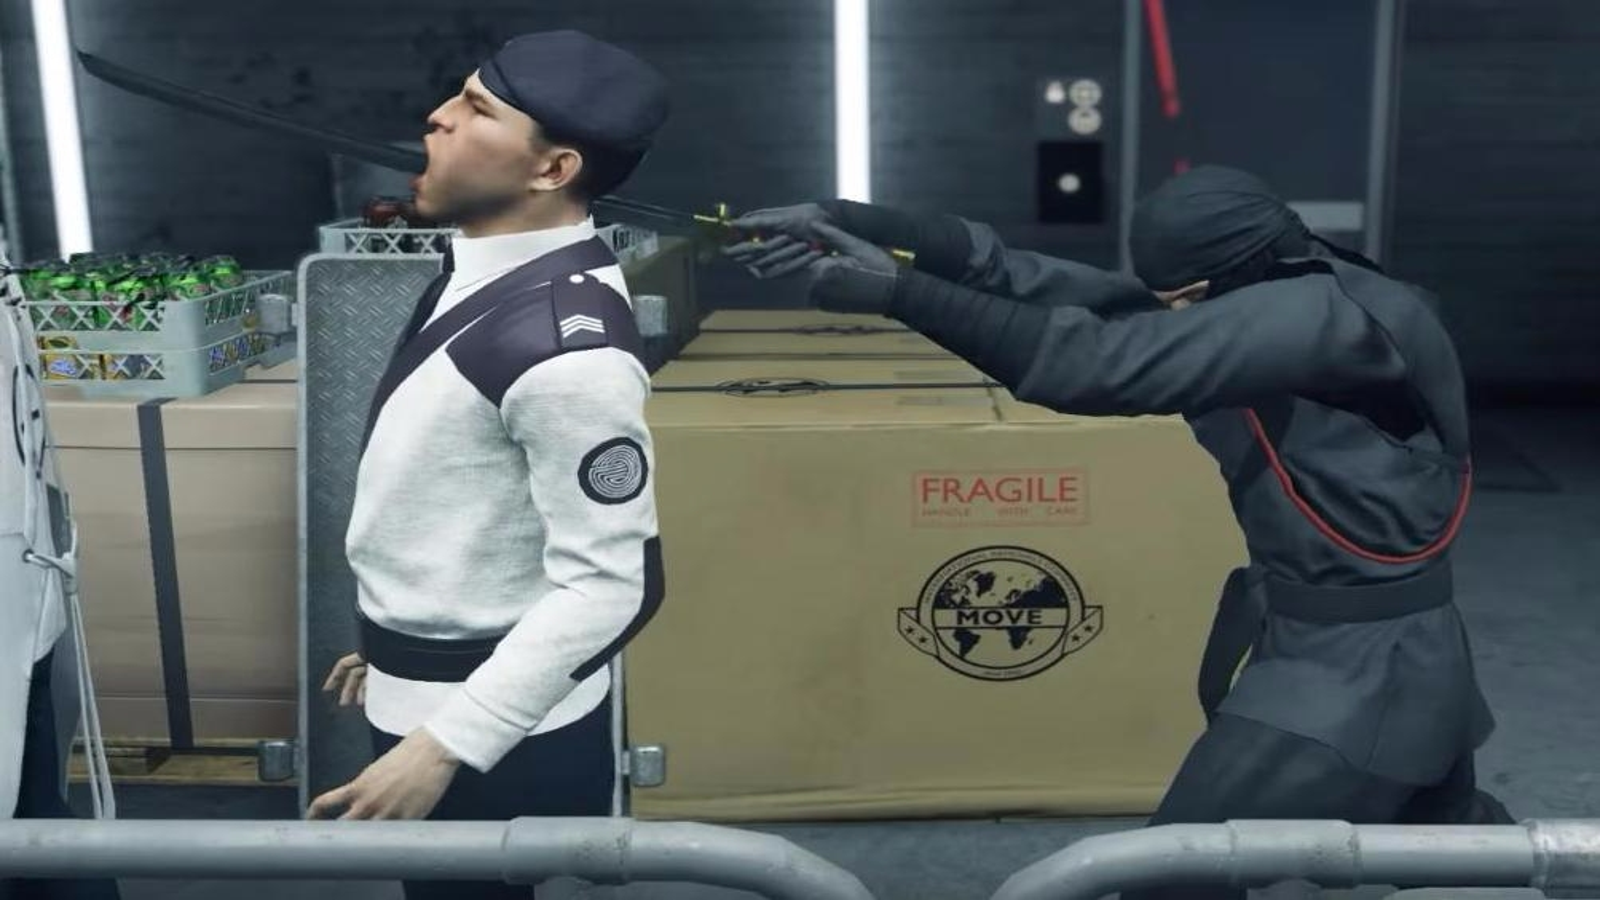 Watch some truly ludicrous kills from 'Dishonored 2